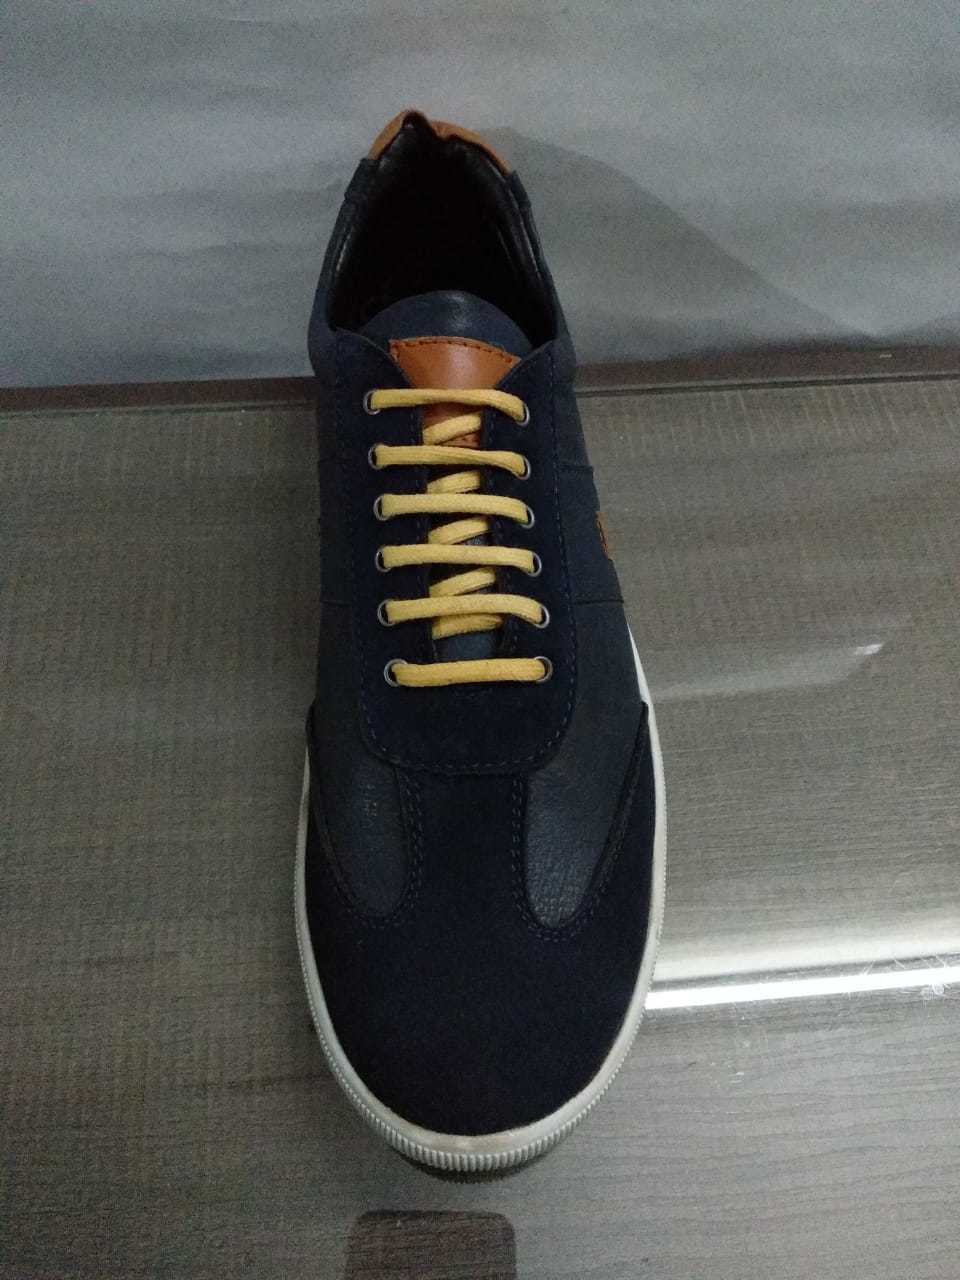 CASUAL SNEAKERS FOR MEN'S